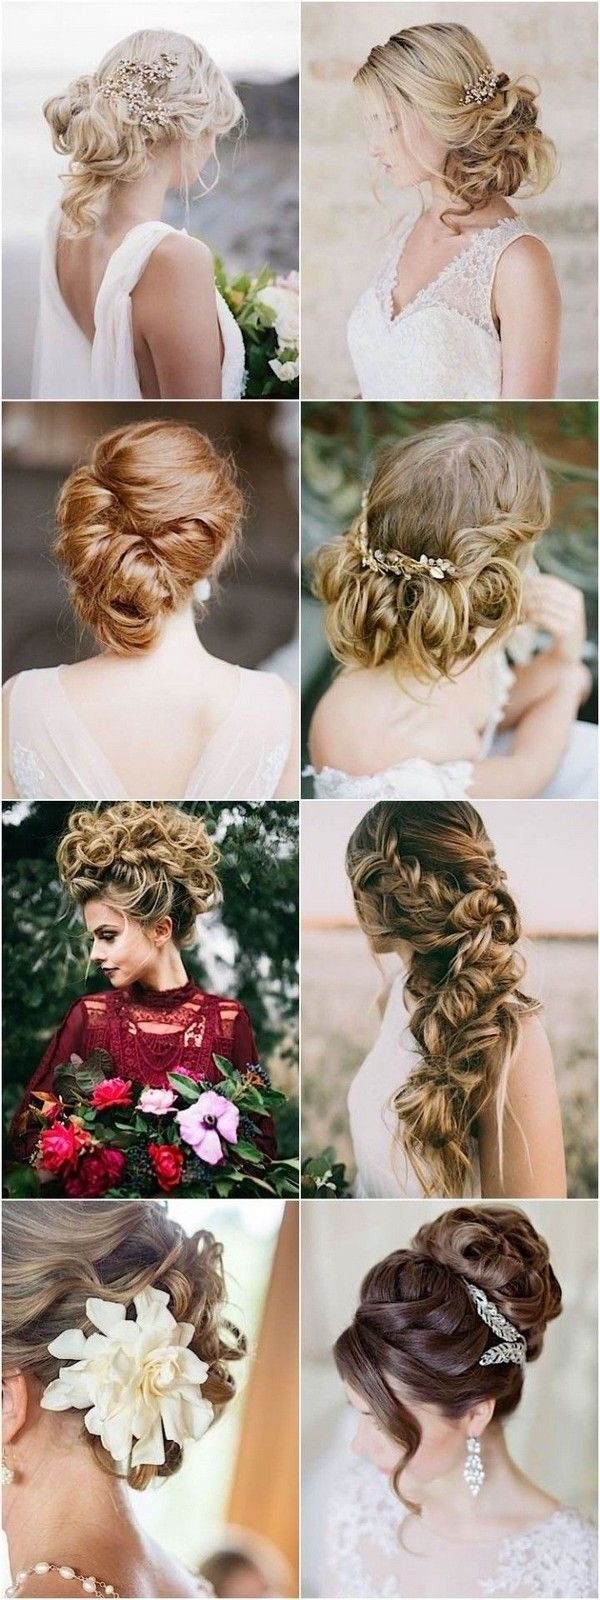 250 Bridal Wedding Hairstyles For Long Hair That Will Inspire With Regard To Most Recent Modern Wedding Hairstyles For Long Hair (View 4 of 15)